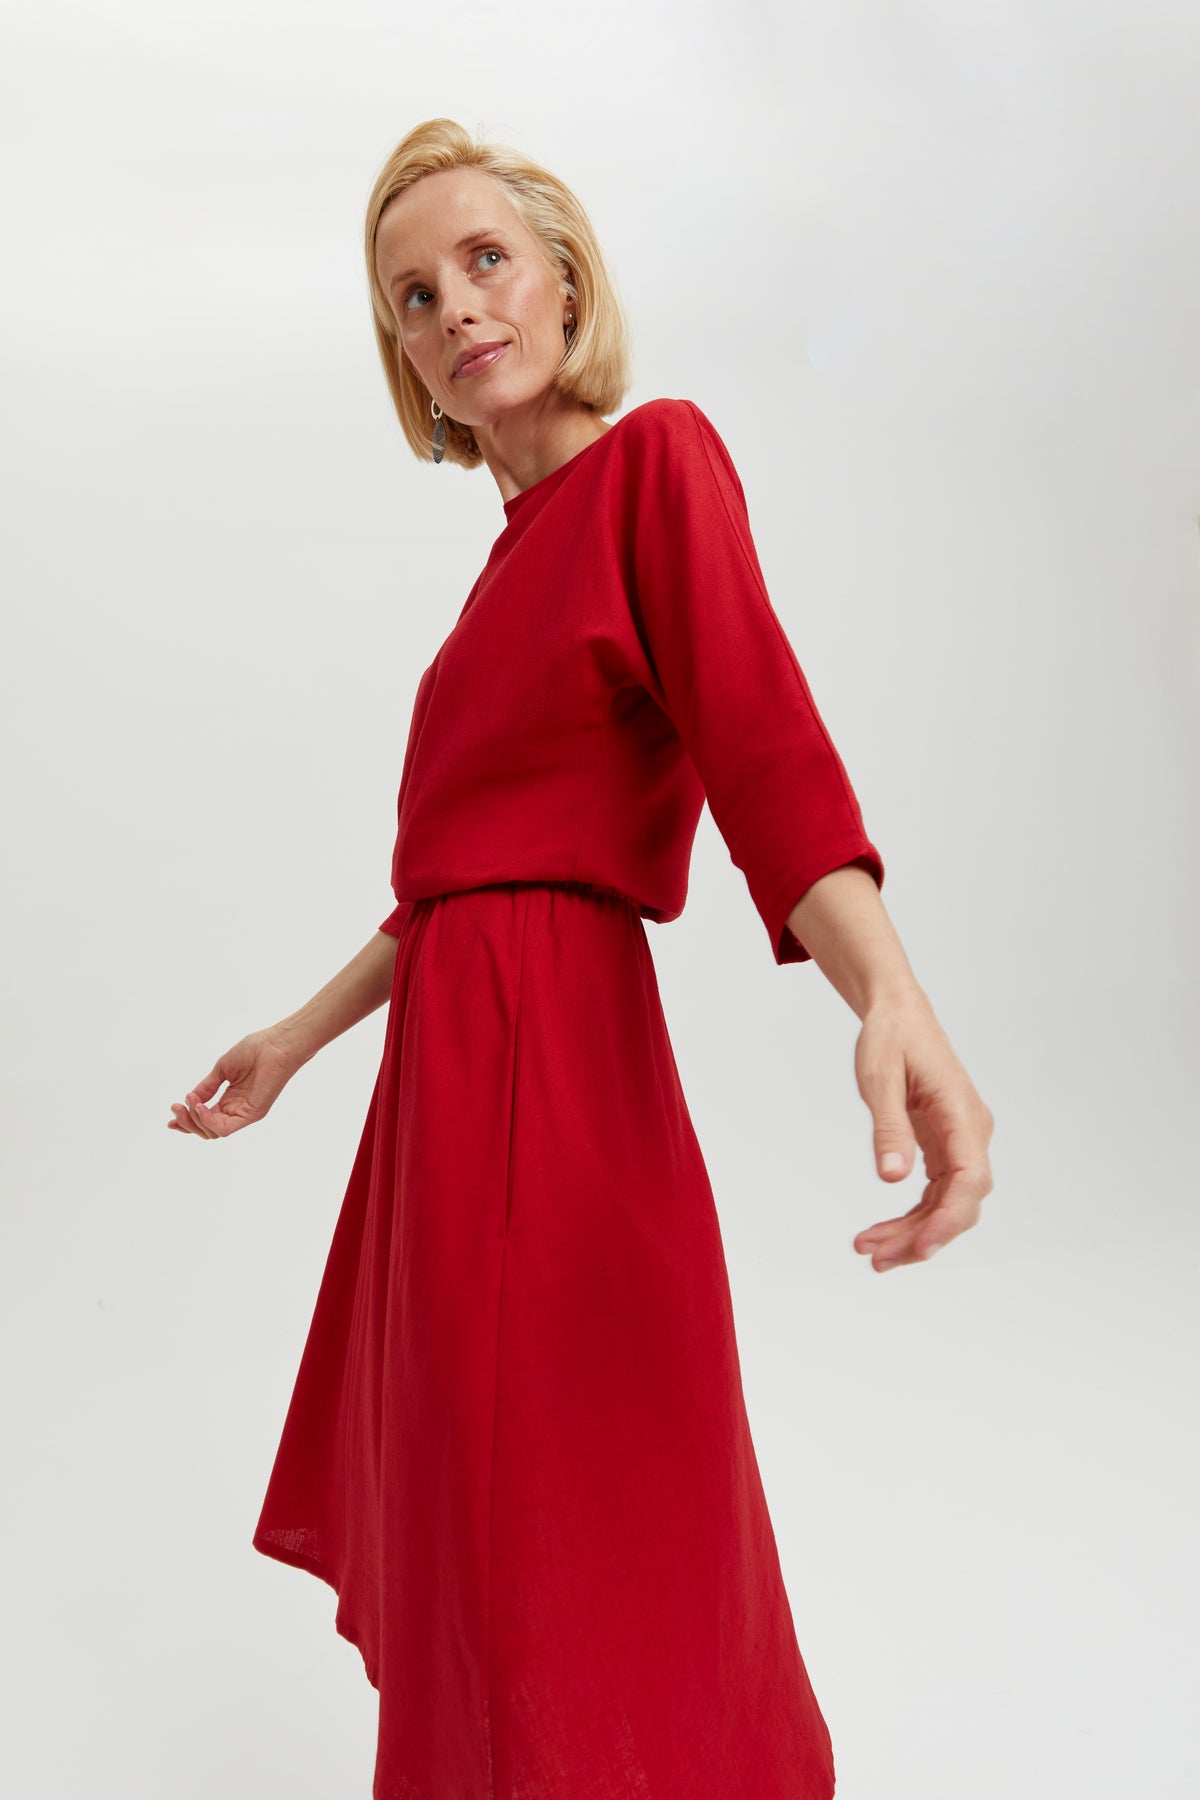 Nane | Linen Dress with 3/4 Sleeves in Red